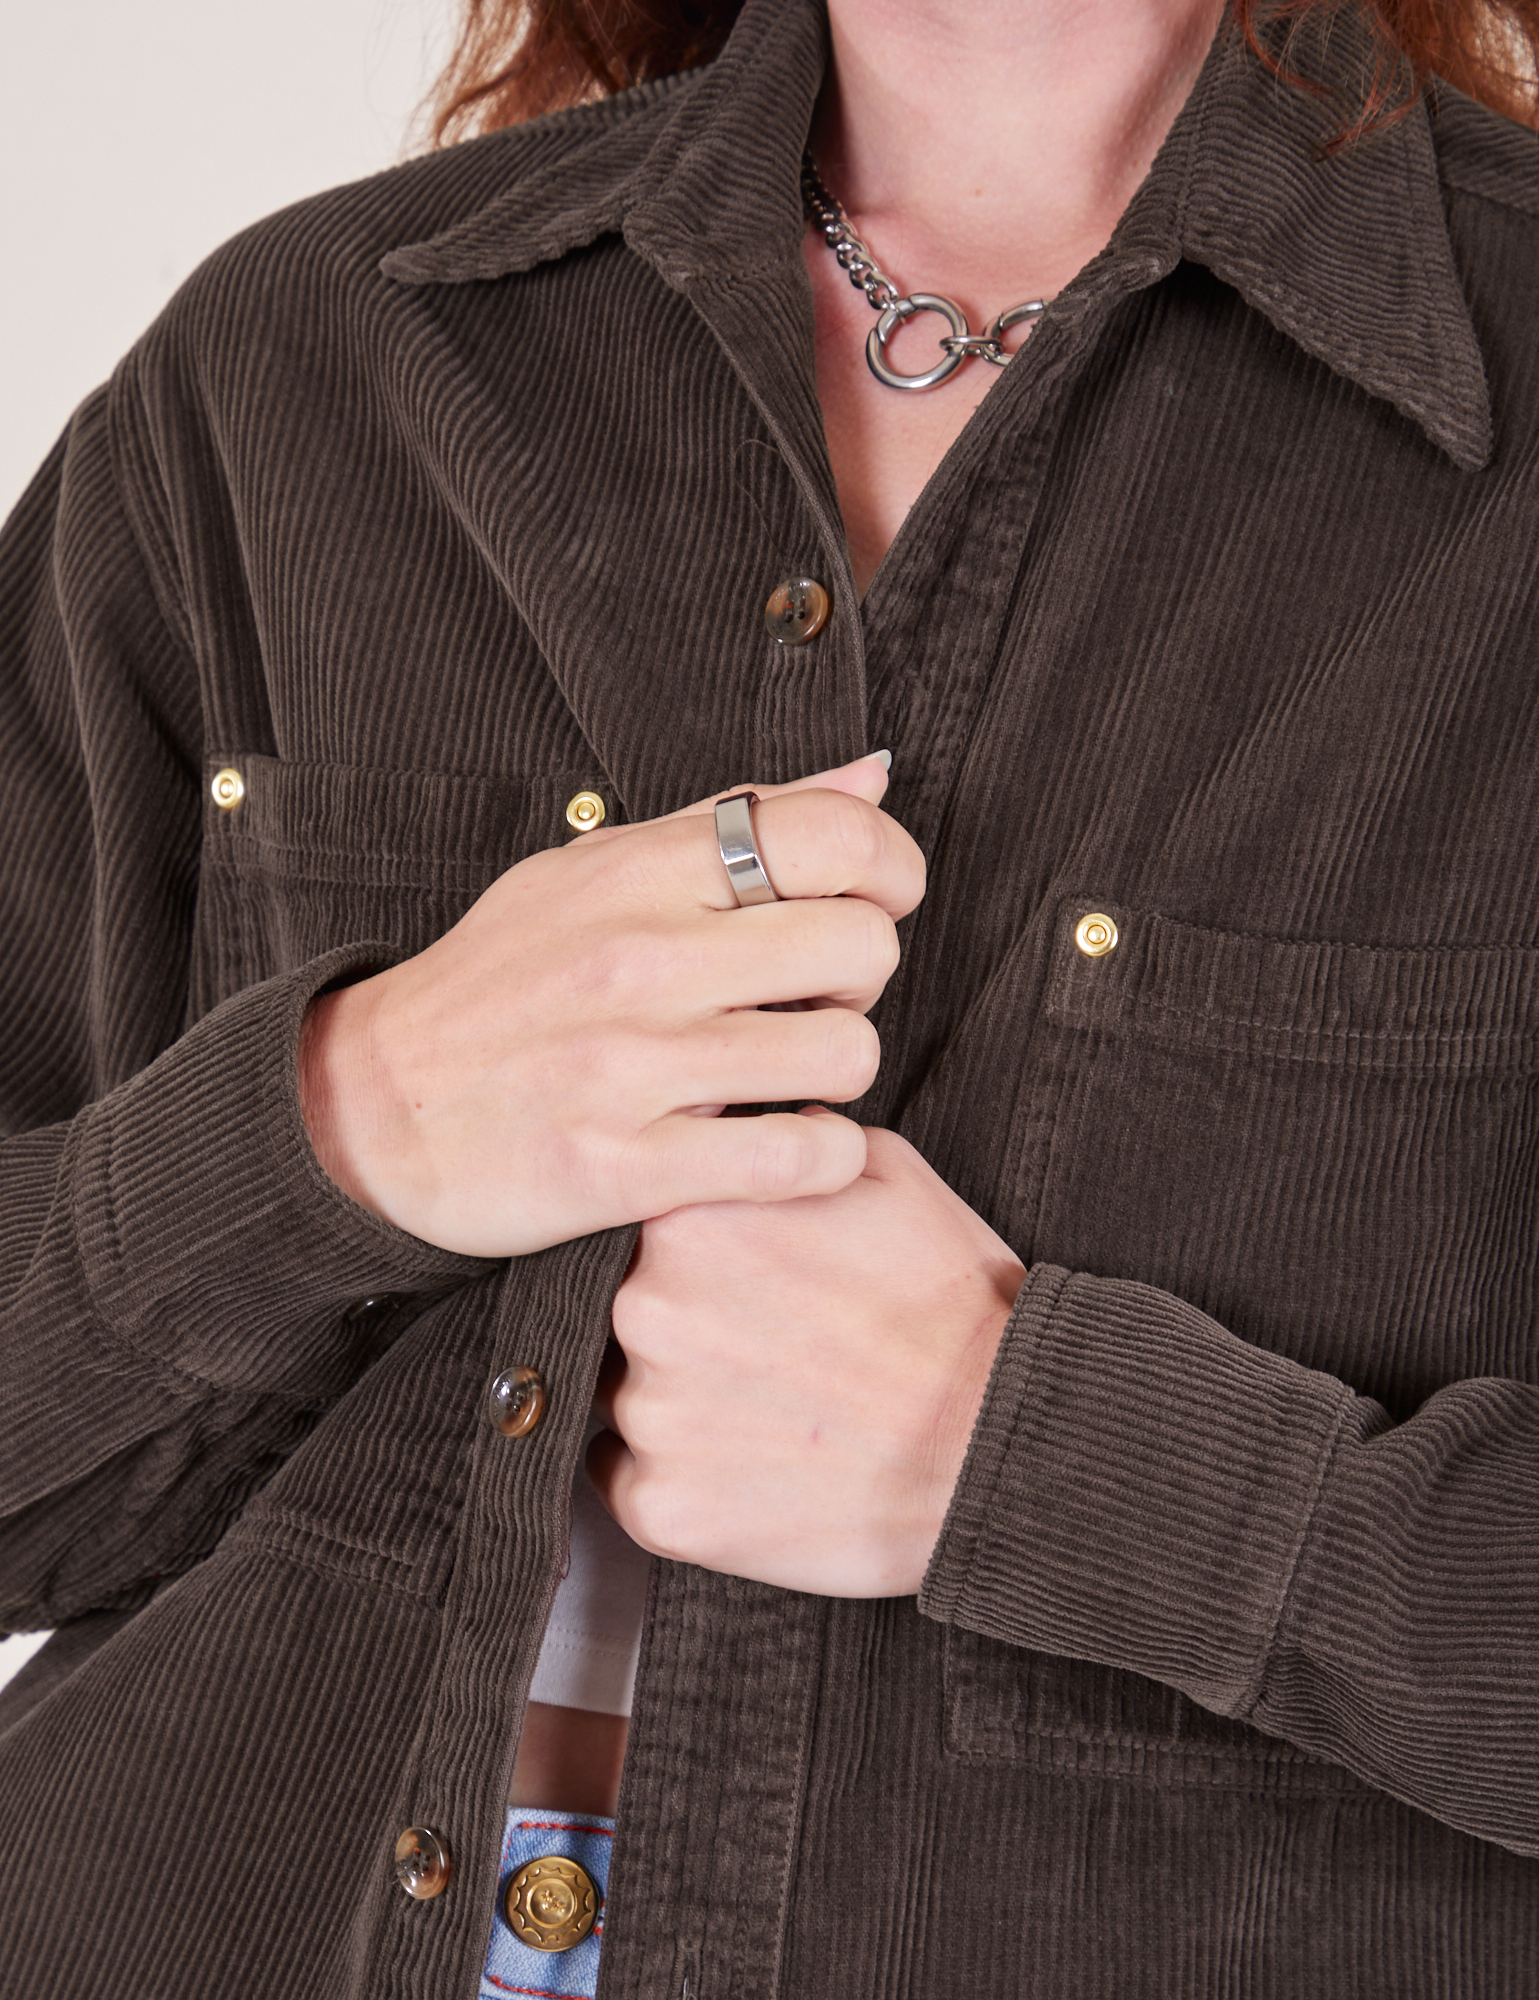 Corduroy Overshirt in Espresso Brown front close up on Alex